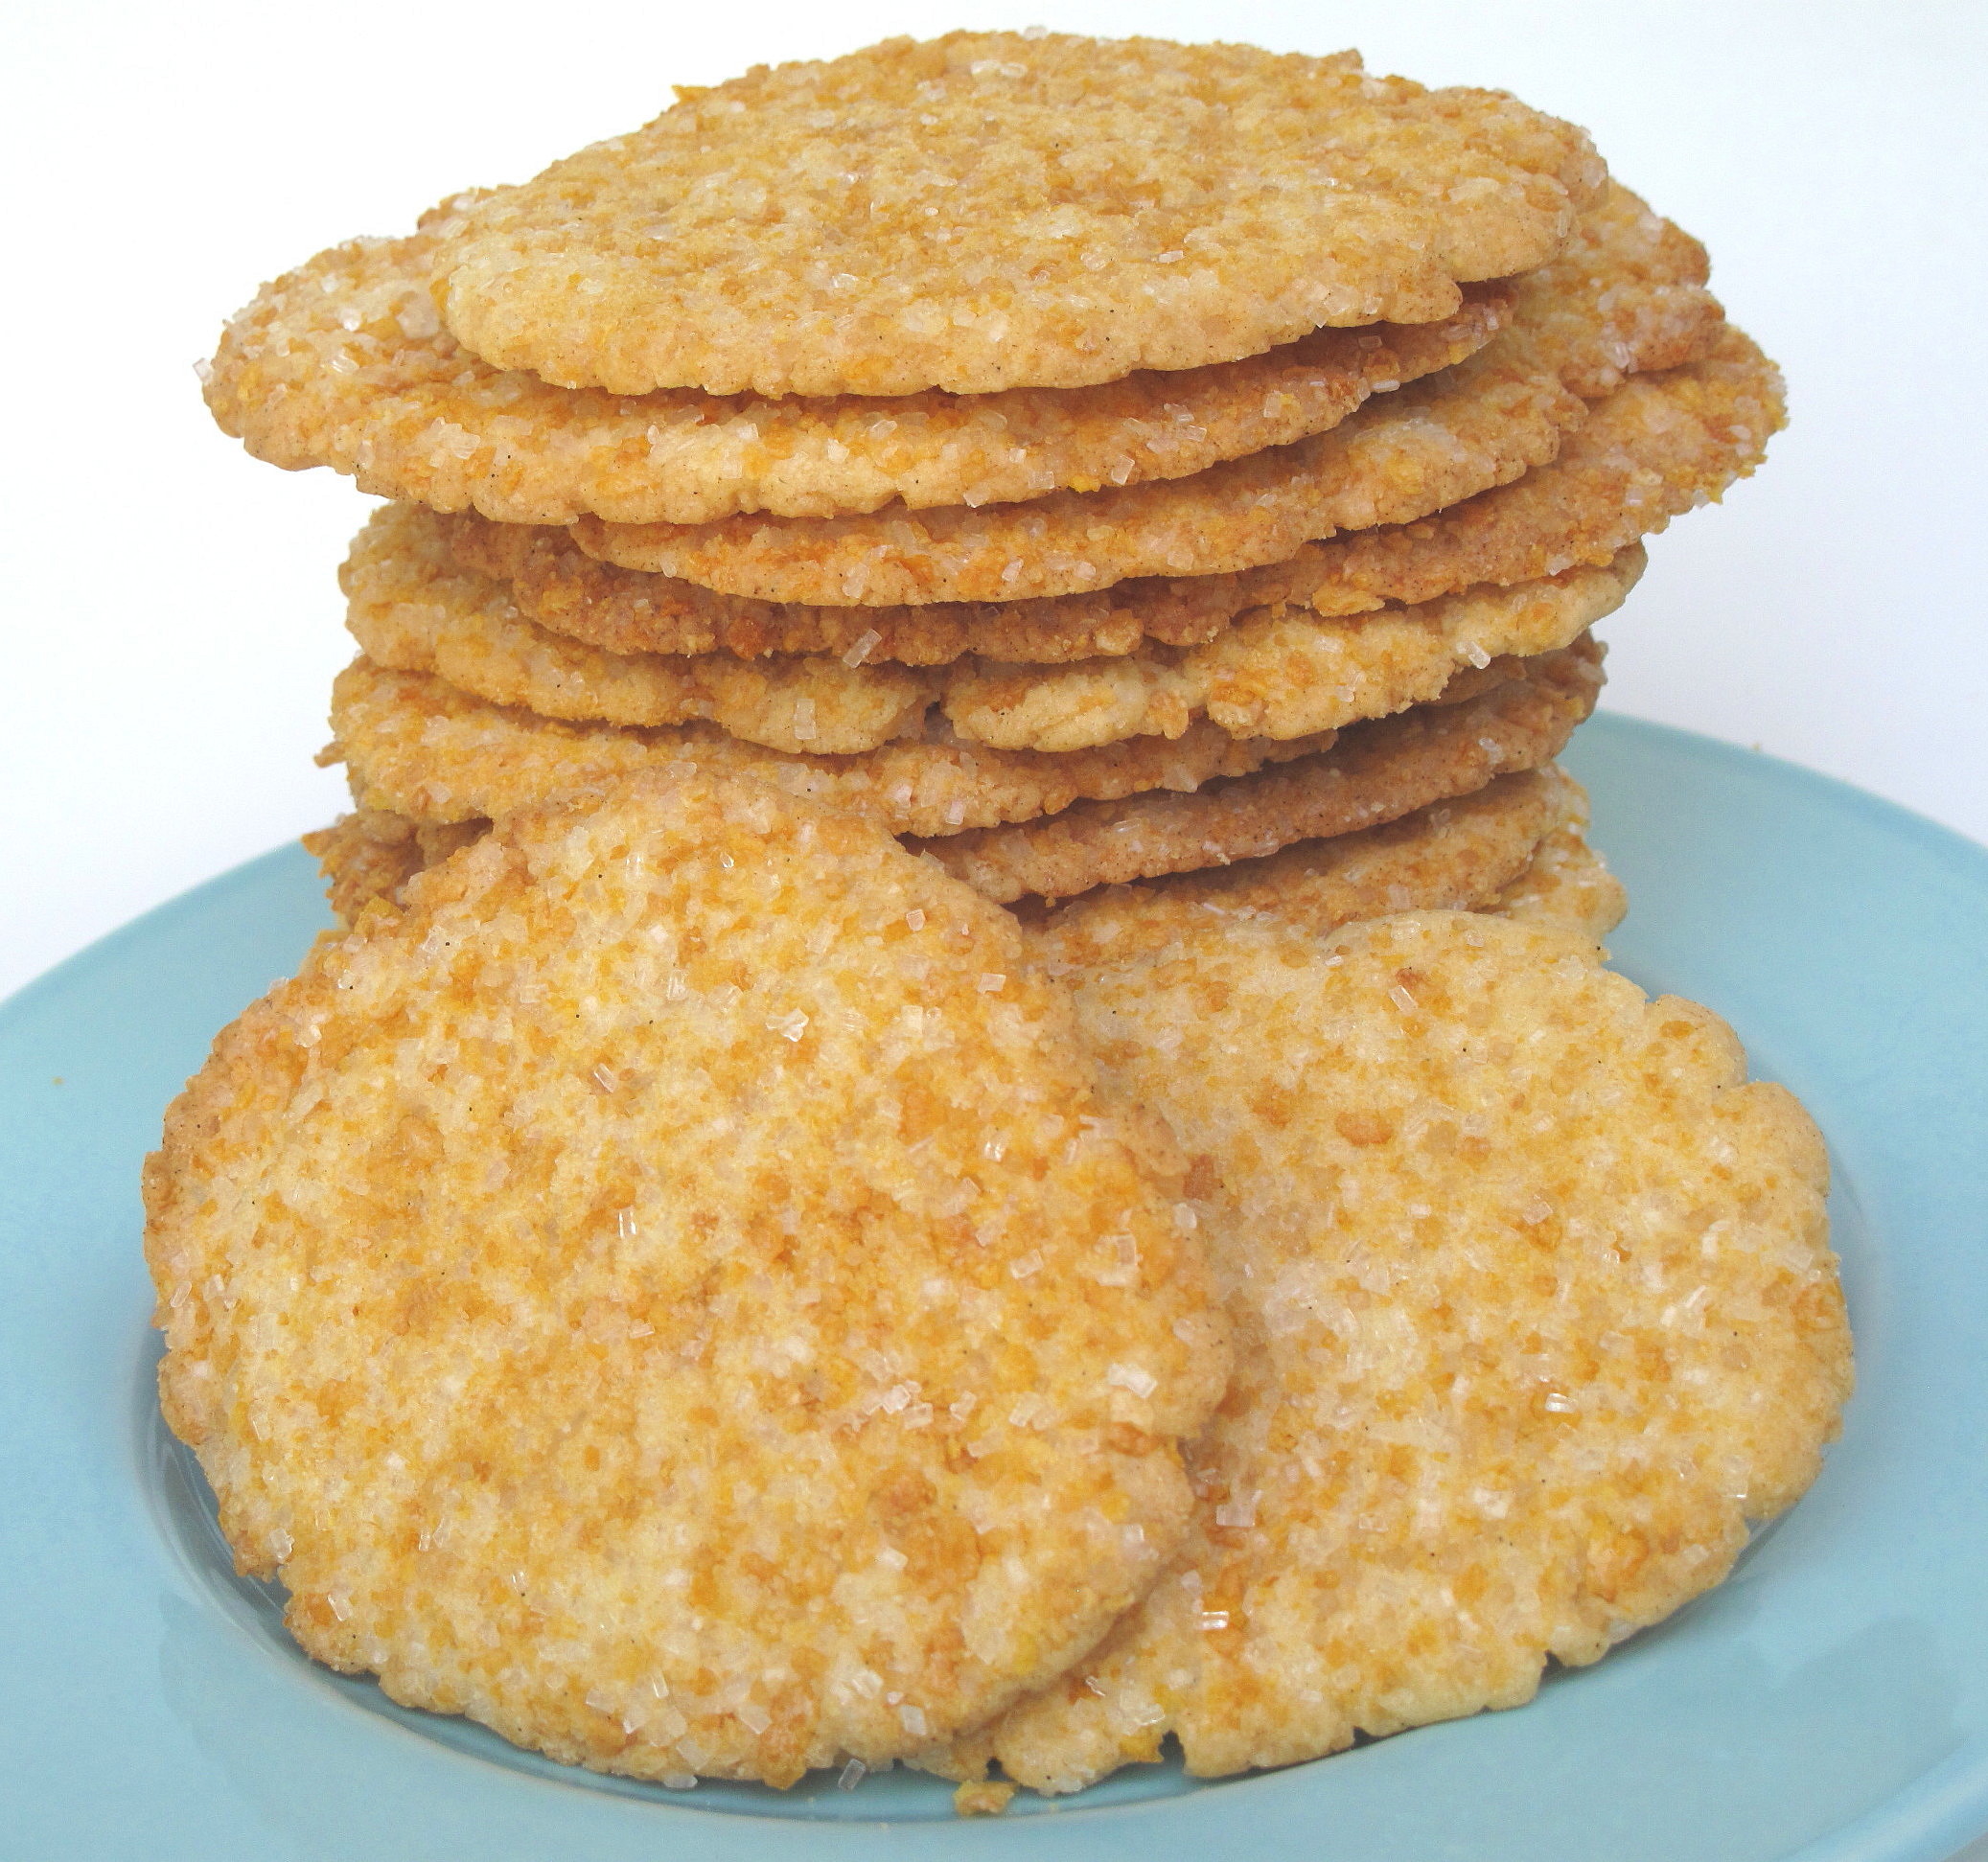 Thin sugar cookies coated in crushed frosted flakes and sugar, stacked on a blue plate.